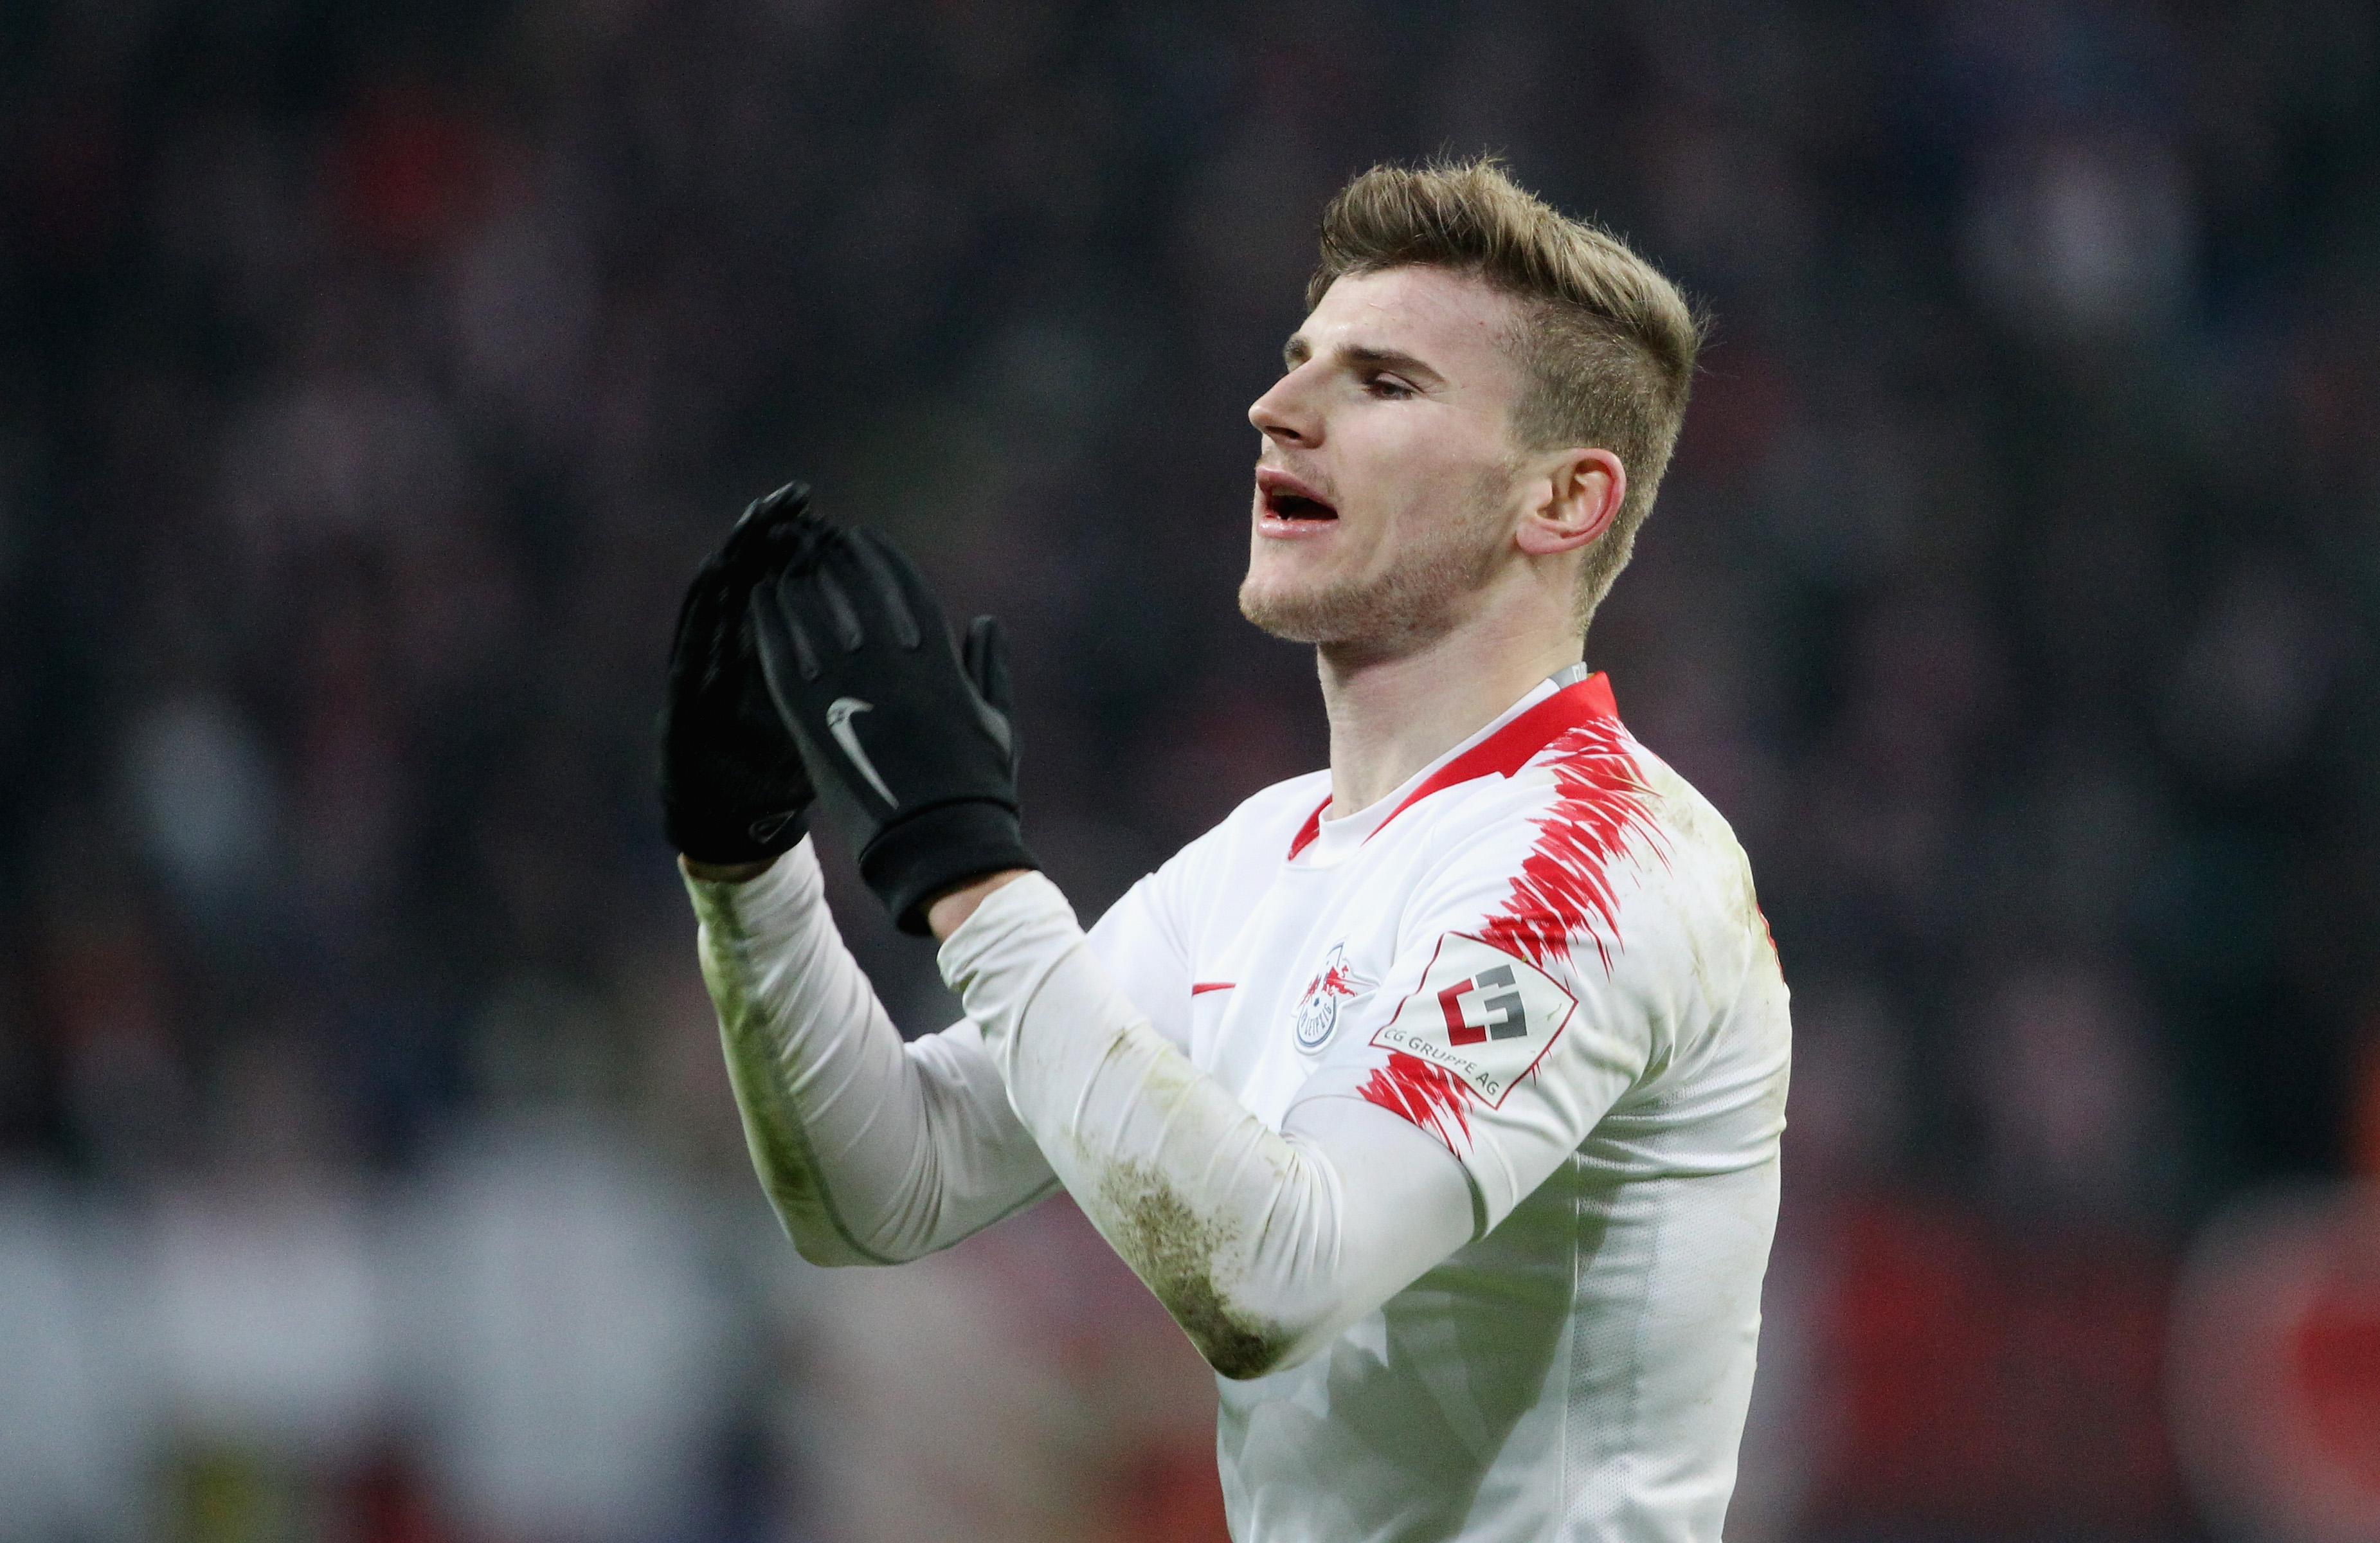 LEIPZIG, SAXONY - JANUARY 19:  Timo Werner of Leipzig looks dejected during the first Bundesliga match between RB Leipzig and Borussia Dortmund at Red Bull Arena on January 19, 2019 in Leipzig, Germany.  (Photo by Karina Hessland/Bongarts/Getty Images)